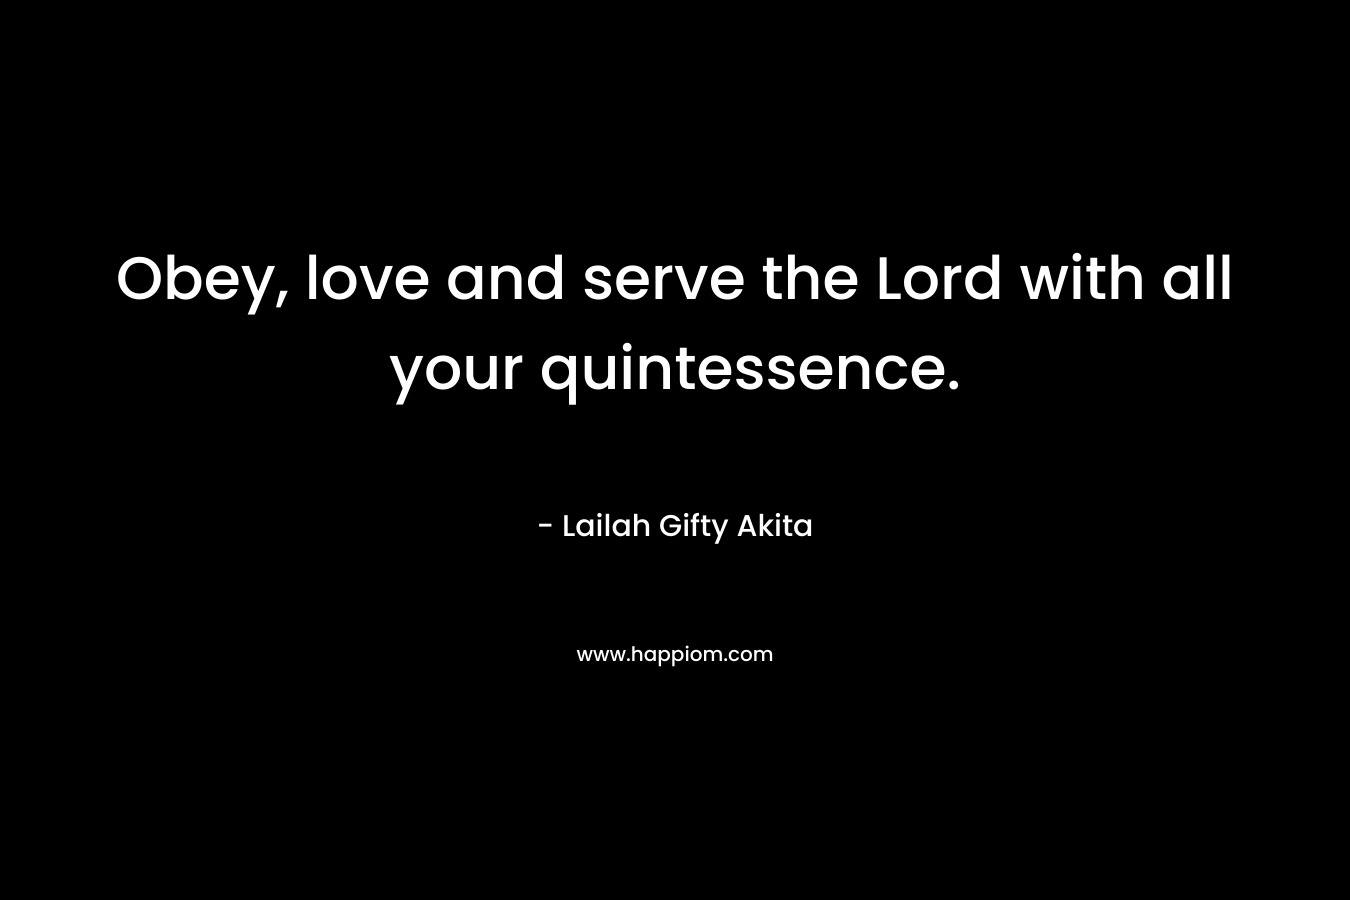 Obey, love and serve the Lord with all your quintessence.